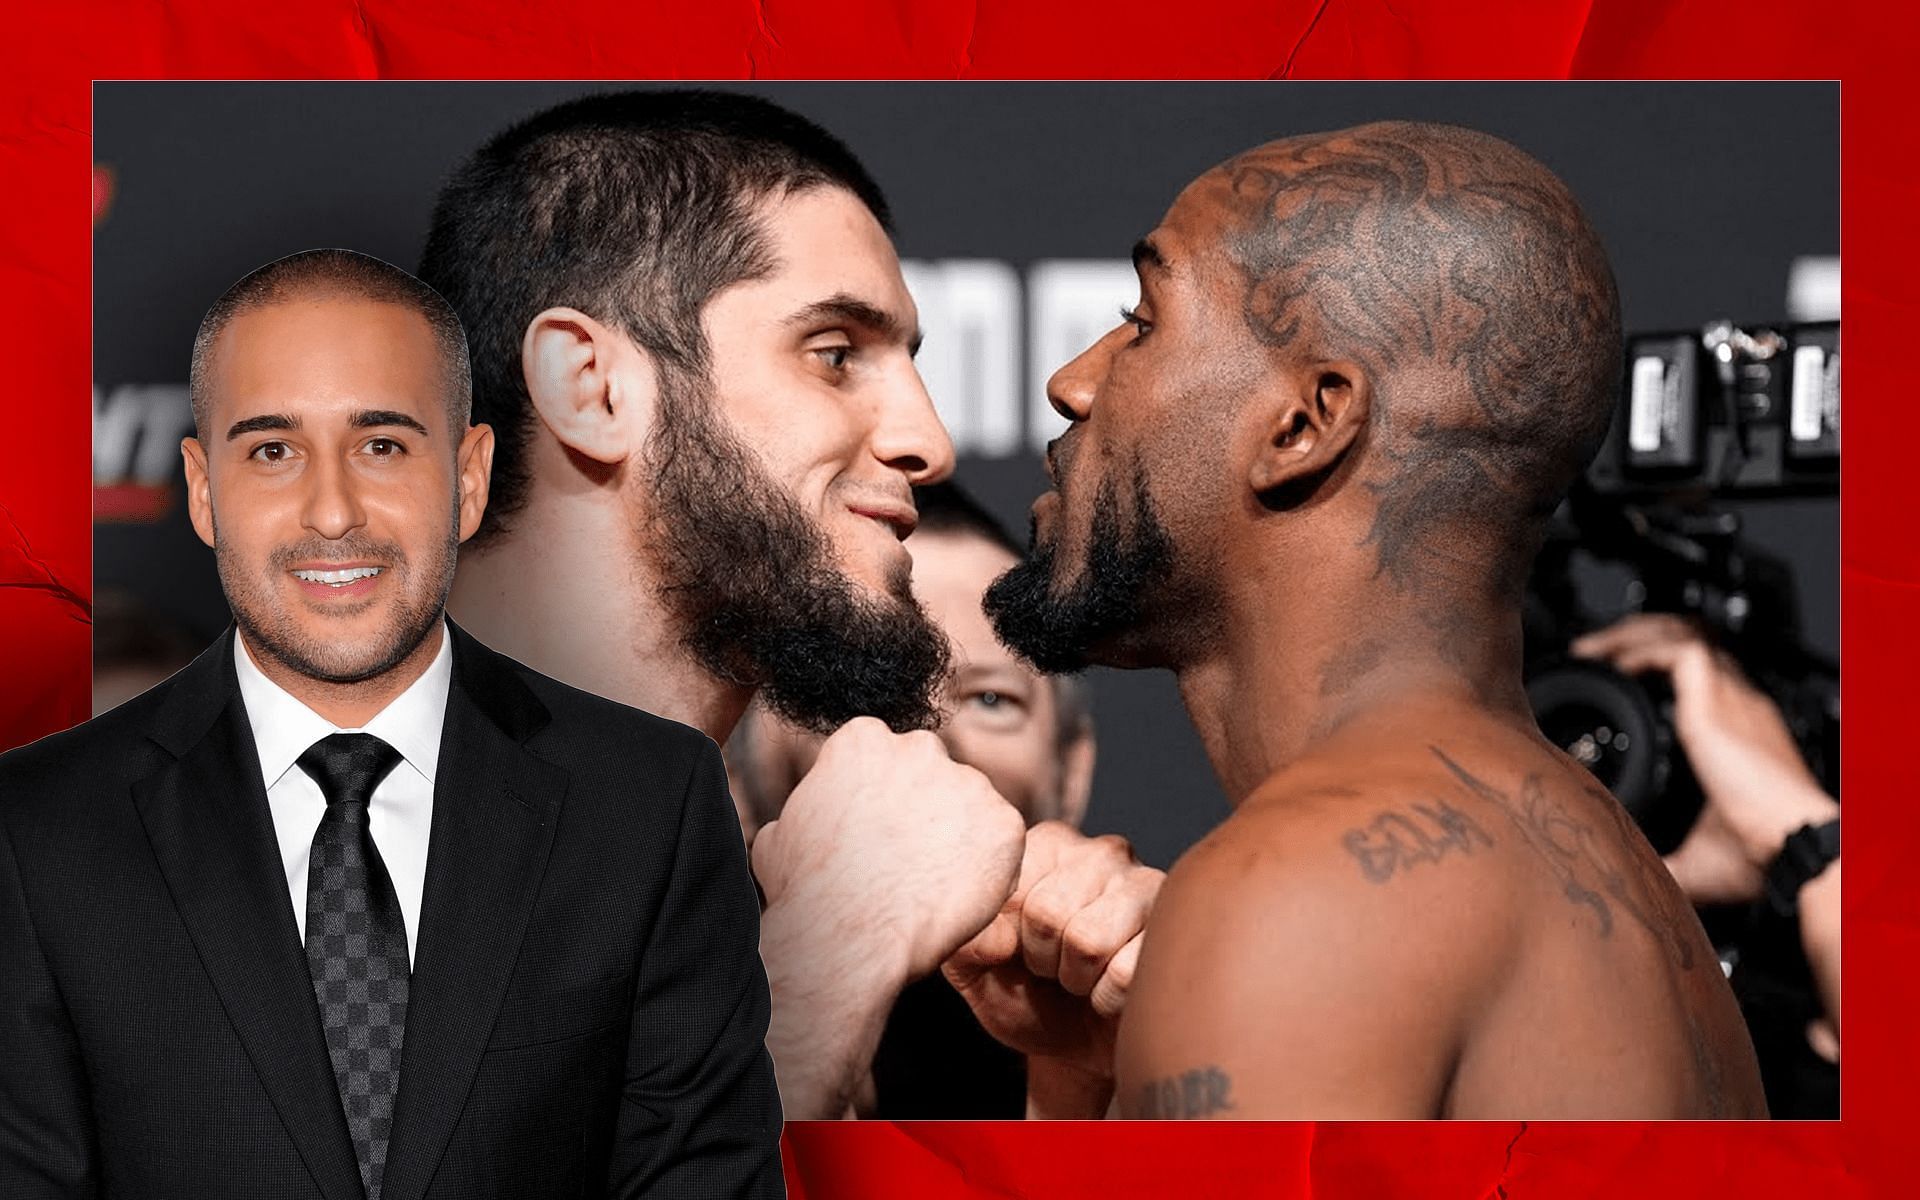 Jon Anik got his wish of seeing Bobby Green compete in a UFC main event